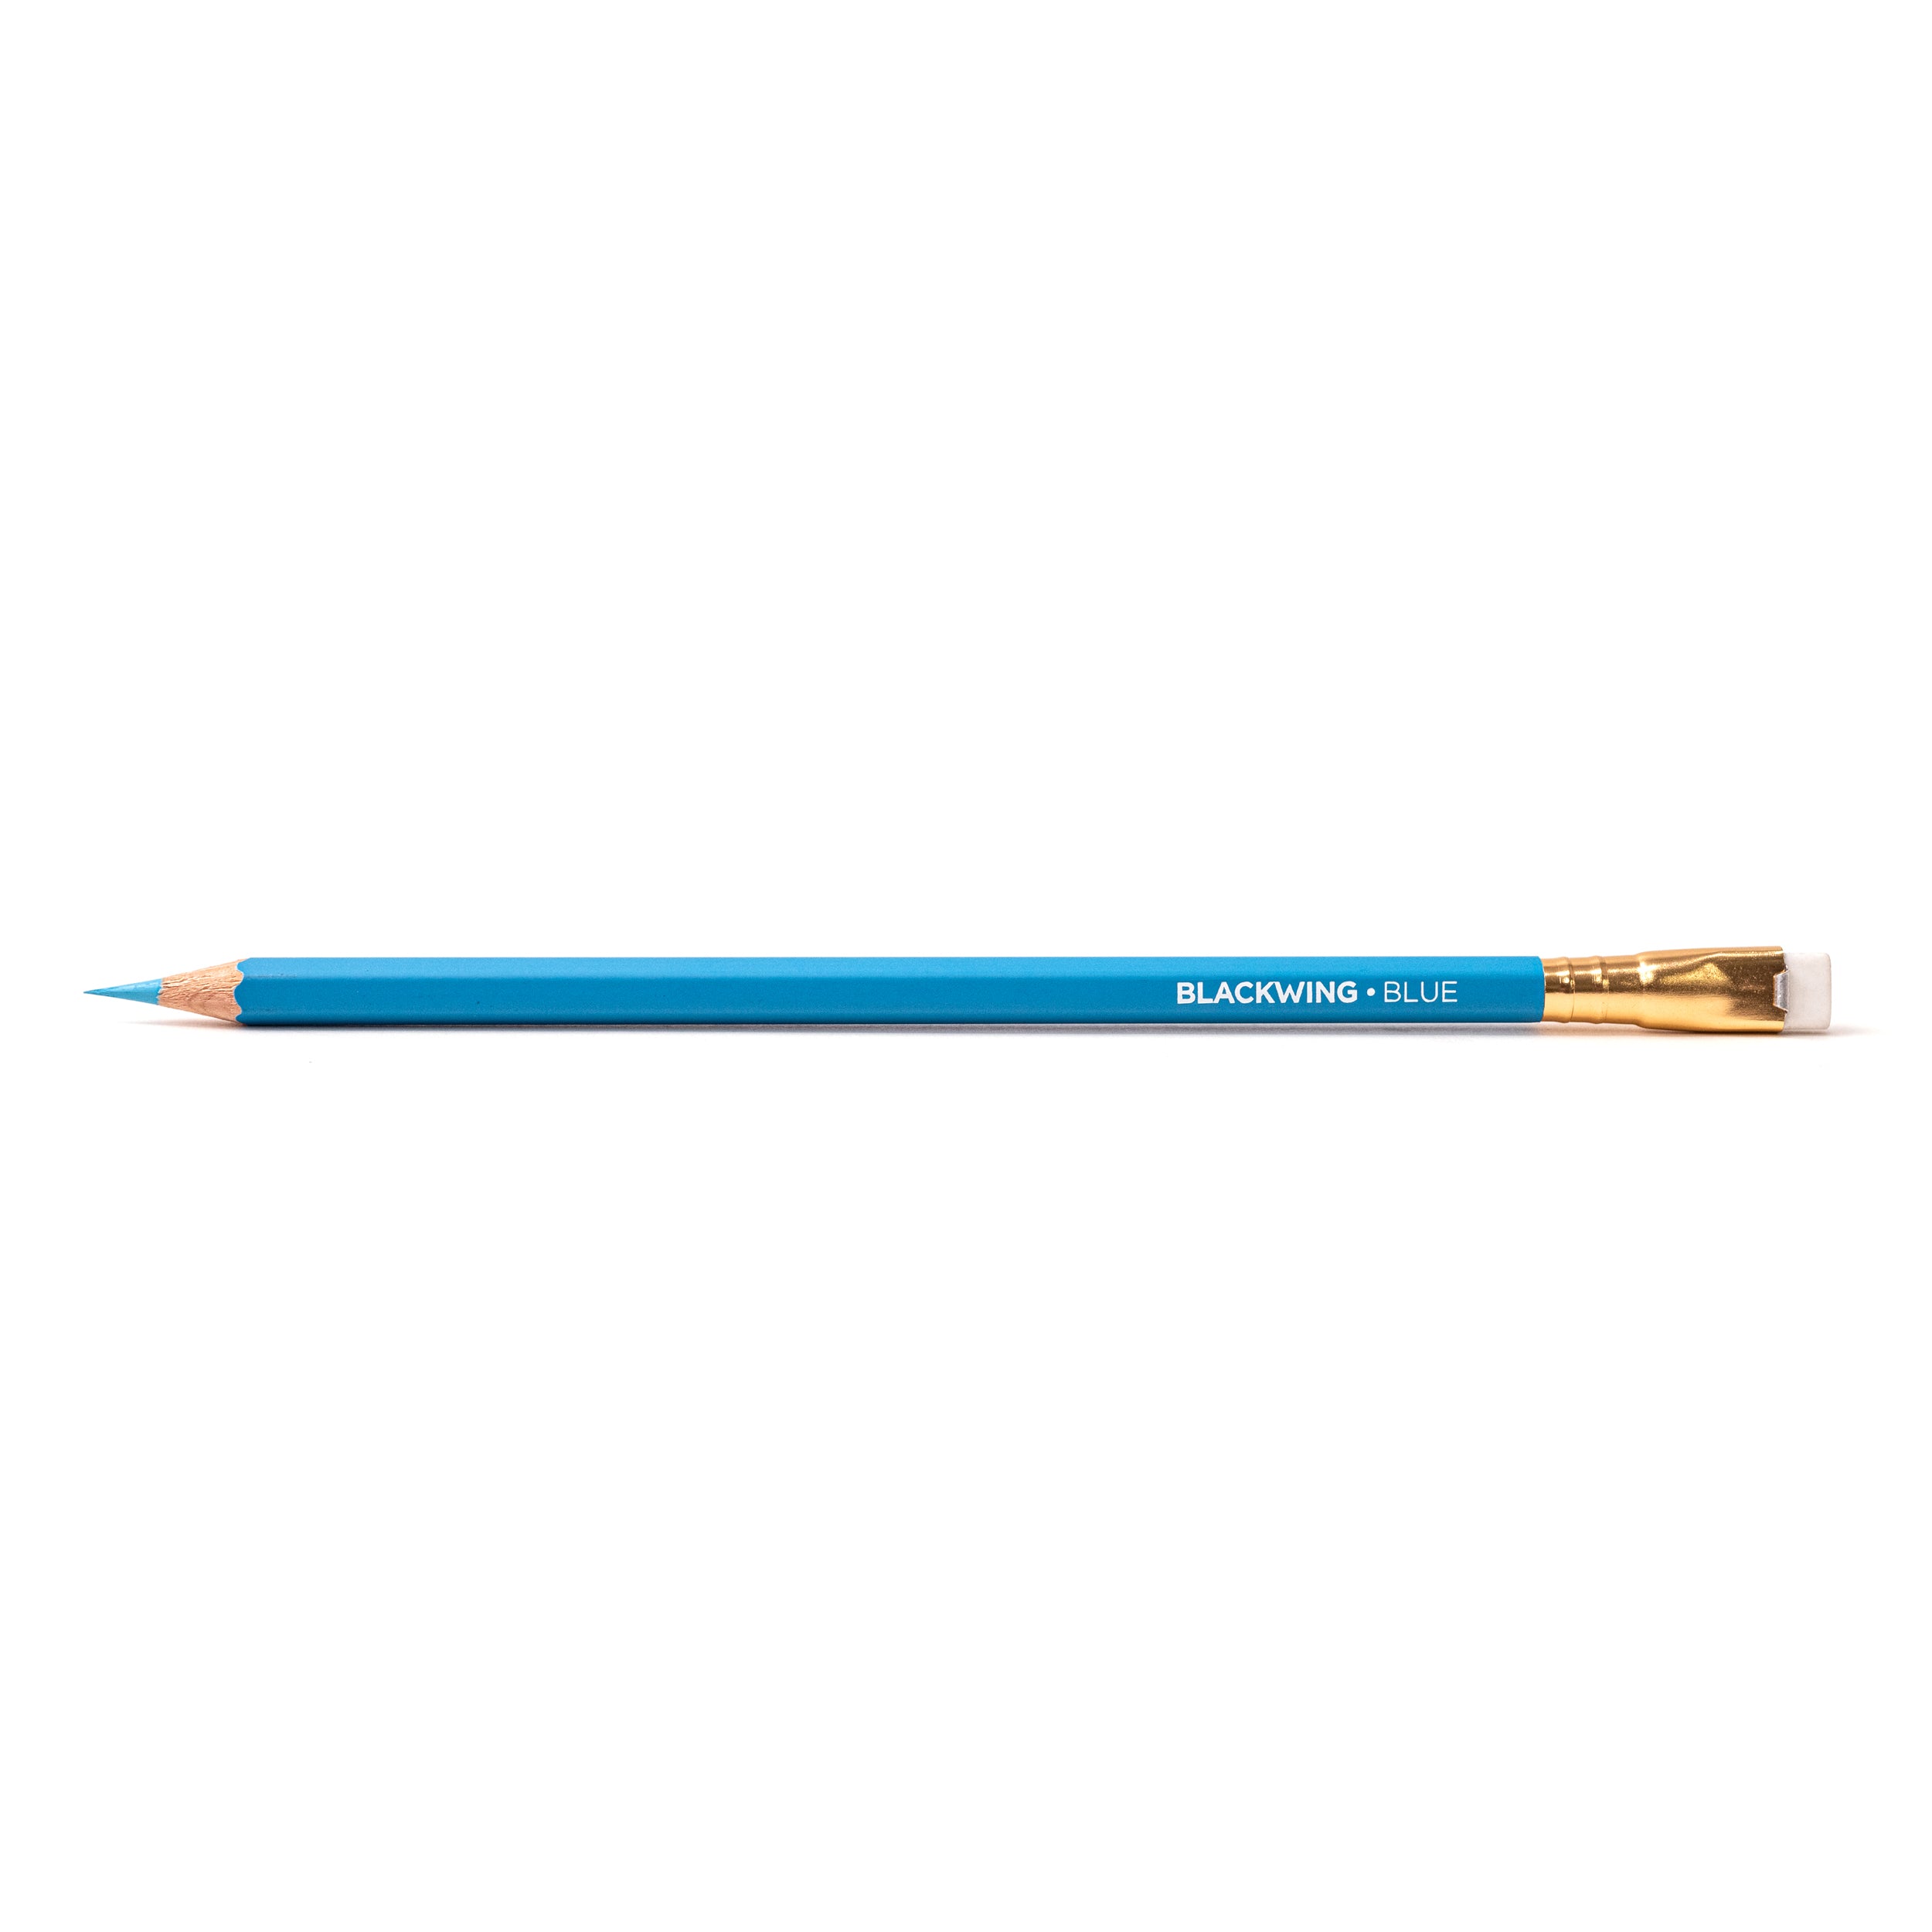 A Blackwing Blue pencil with a gold tip and non-photo blue core.